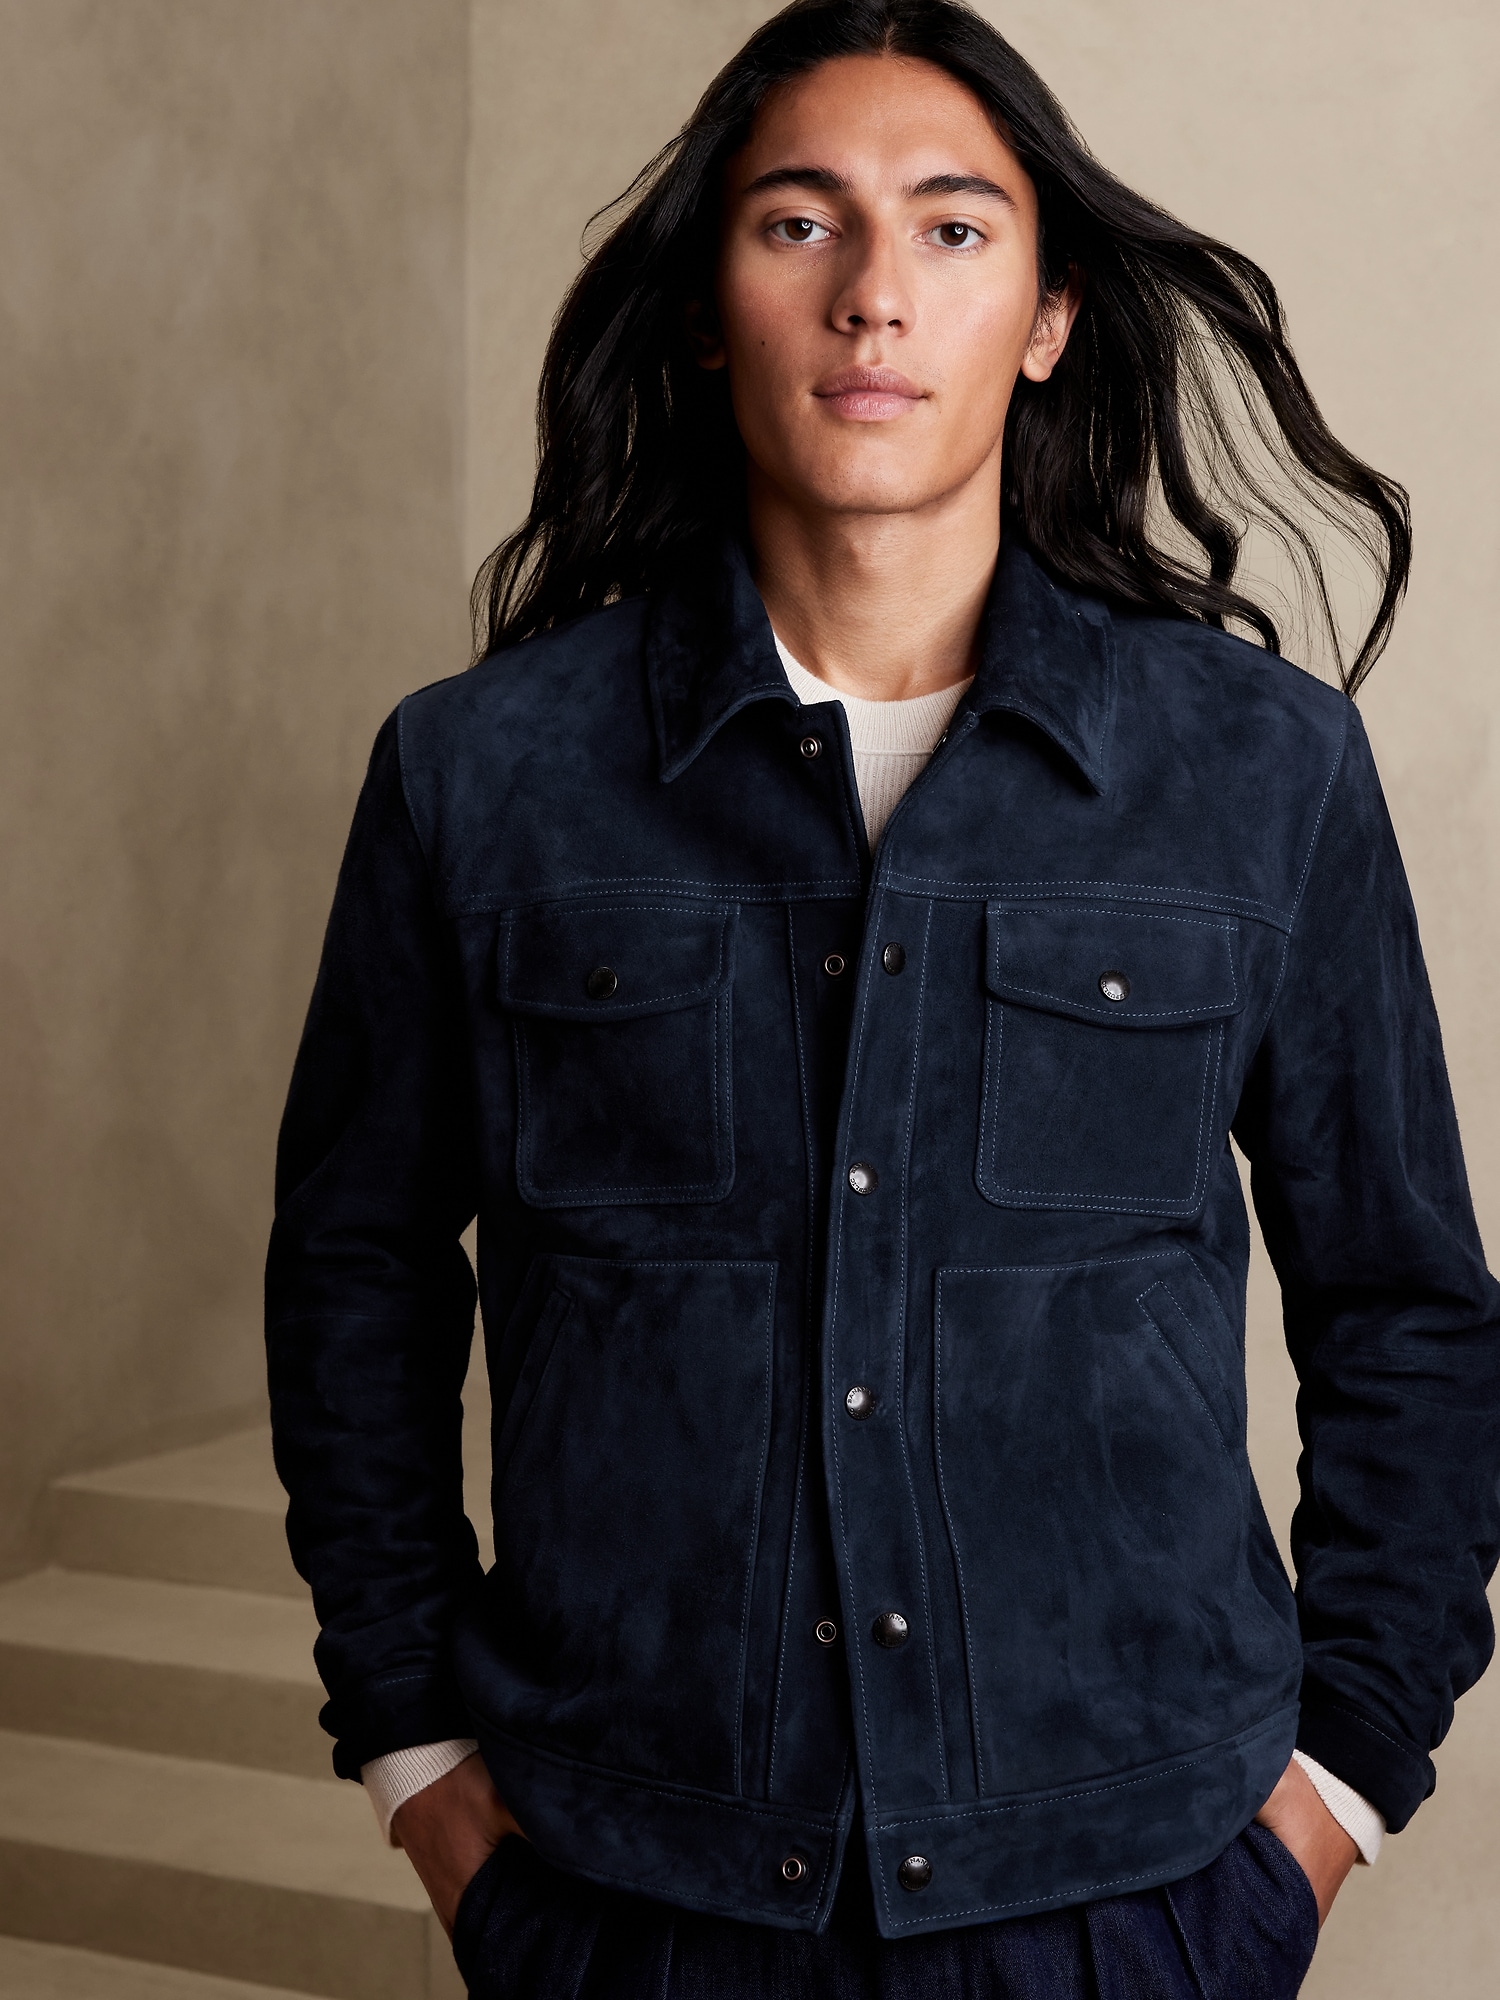 Banana Republic Suede Trucker Jacket | Square One